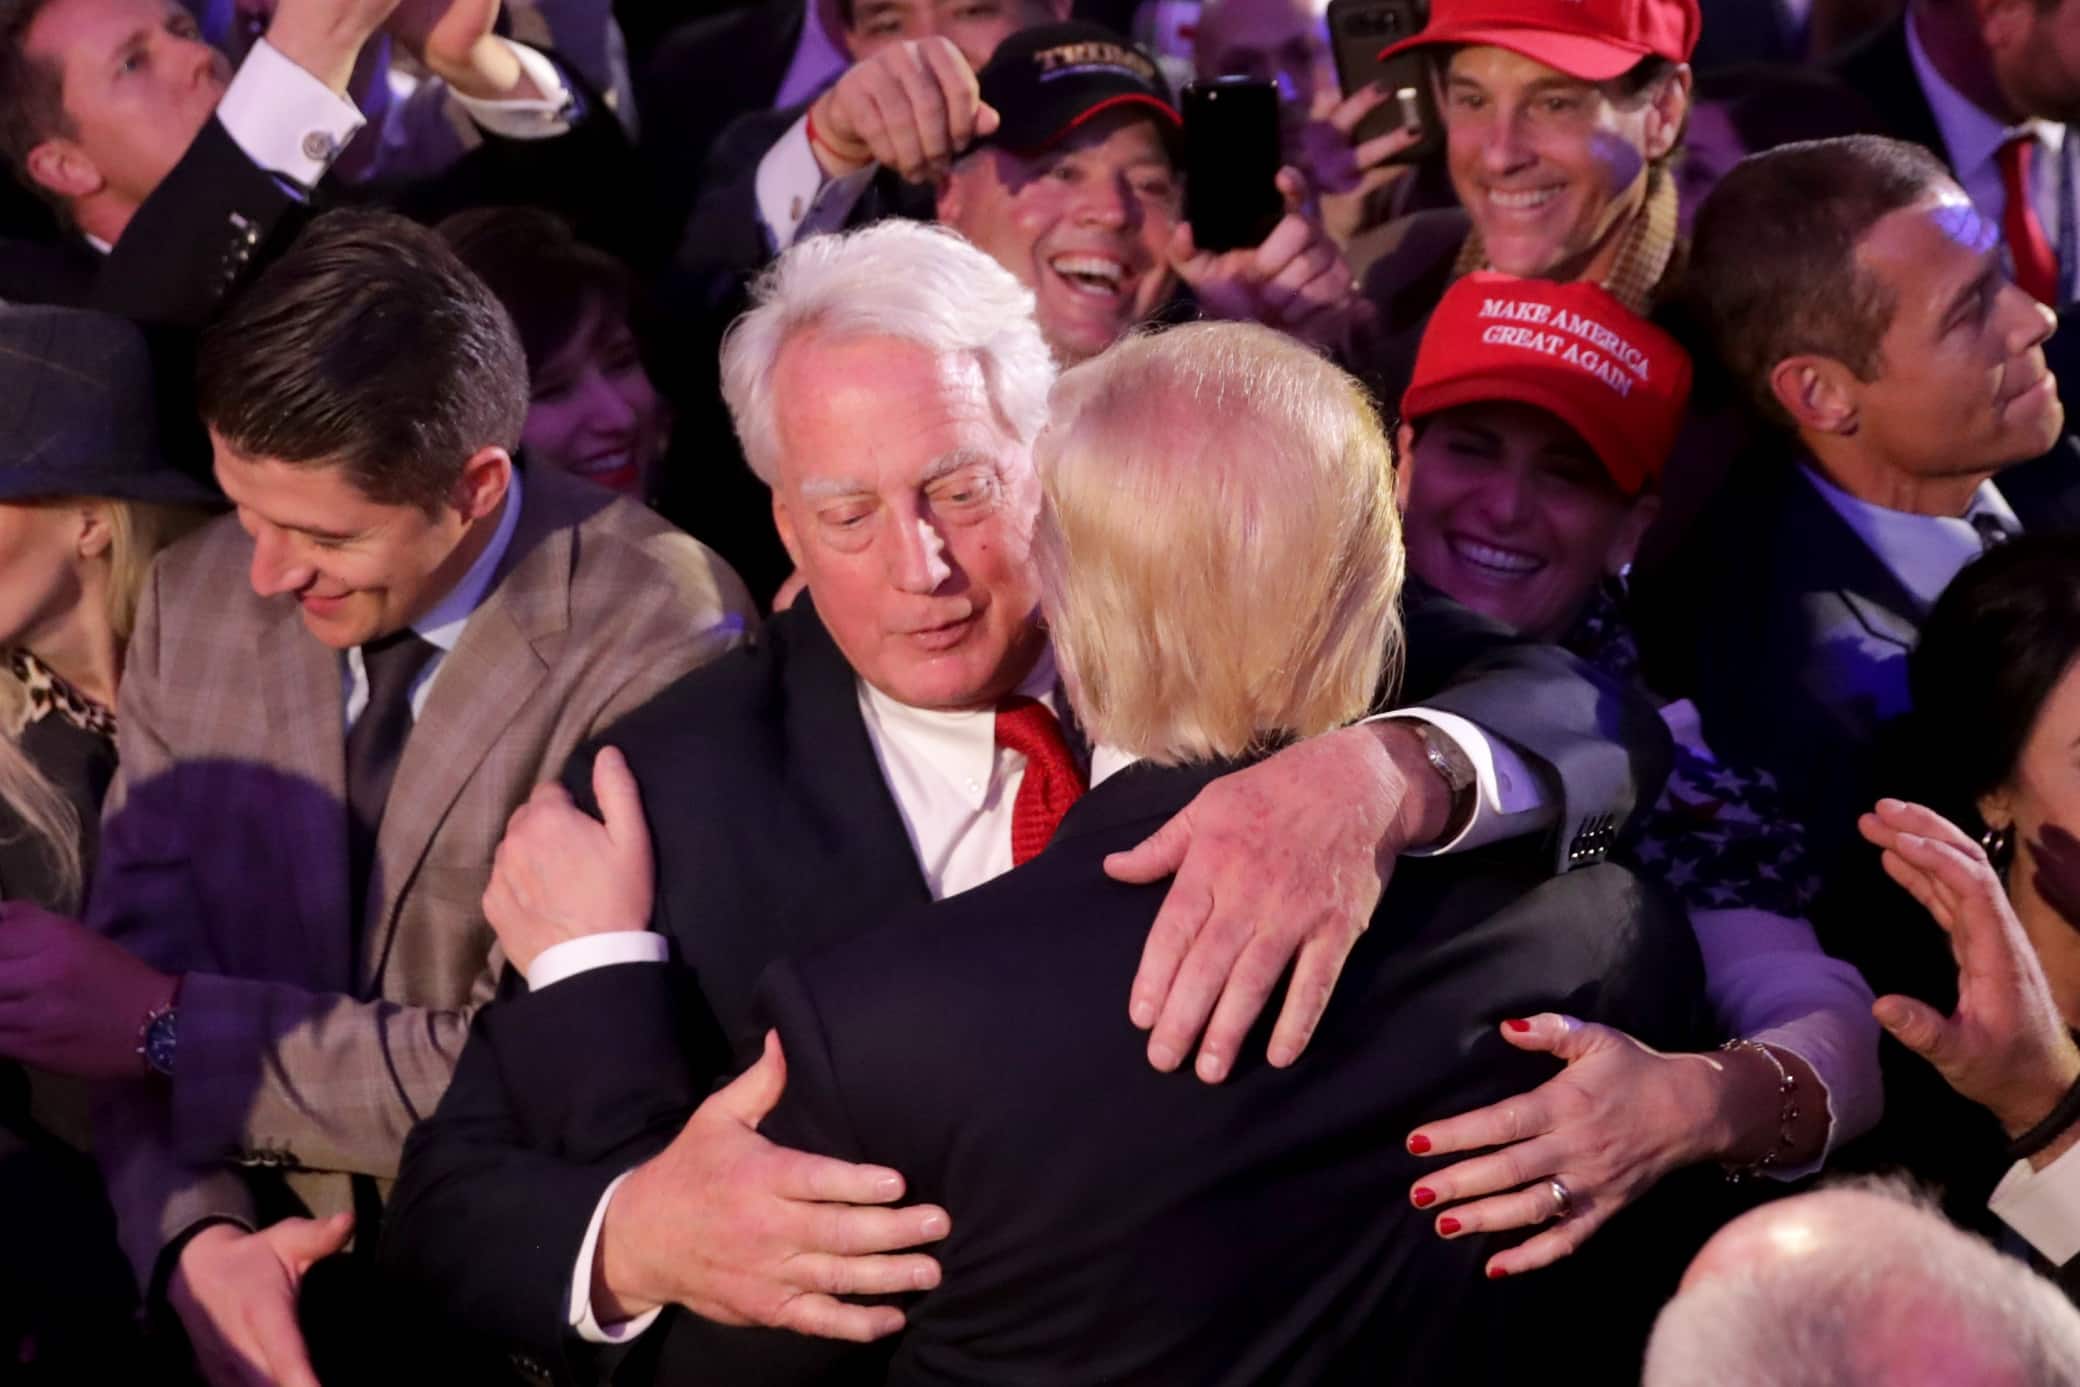 NEW YORK, NY - NOVEMBER 09:  Republican president-elect Donald Trump (R) hugs his brother Robert Trump after delivering his acceptance speech at the New York Hilton Midtown in the early morning hours of November 9, 2016 in New York City. Donald Trump defeated Democratic presidential nominee Hillary Clinton to become the 45th president of the United States.  (Photo by Chip Somodevilla/Getty Images)